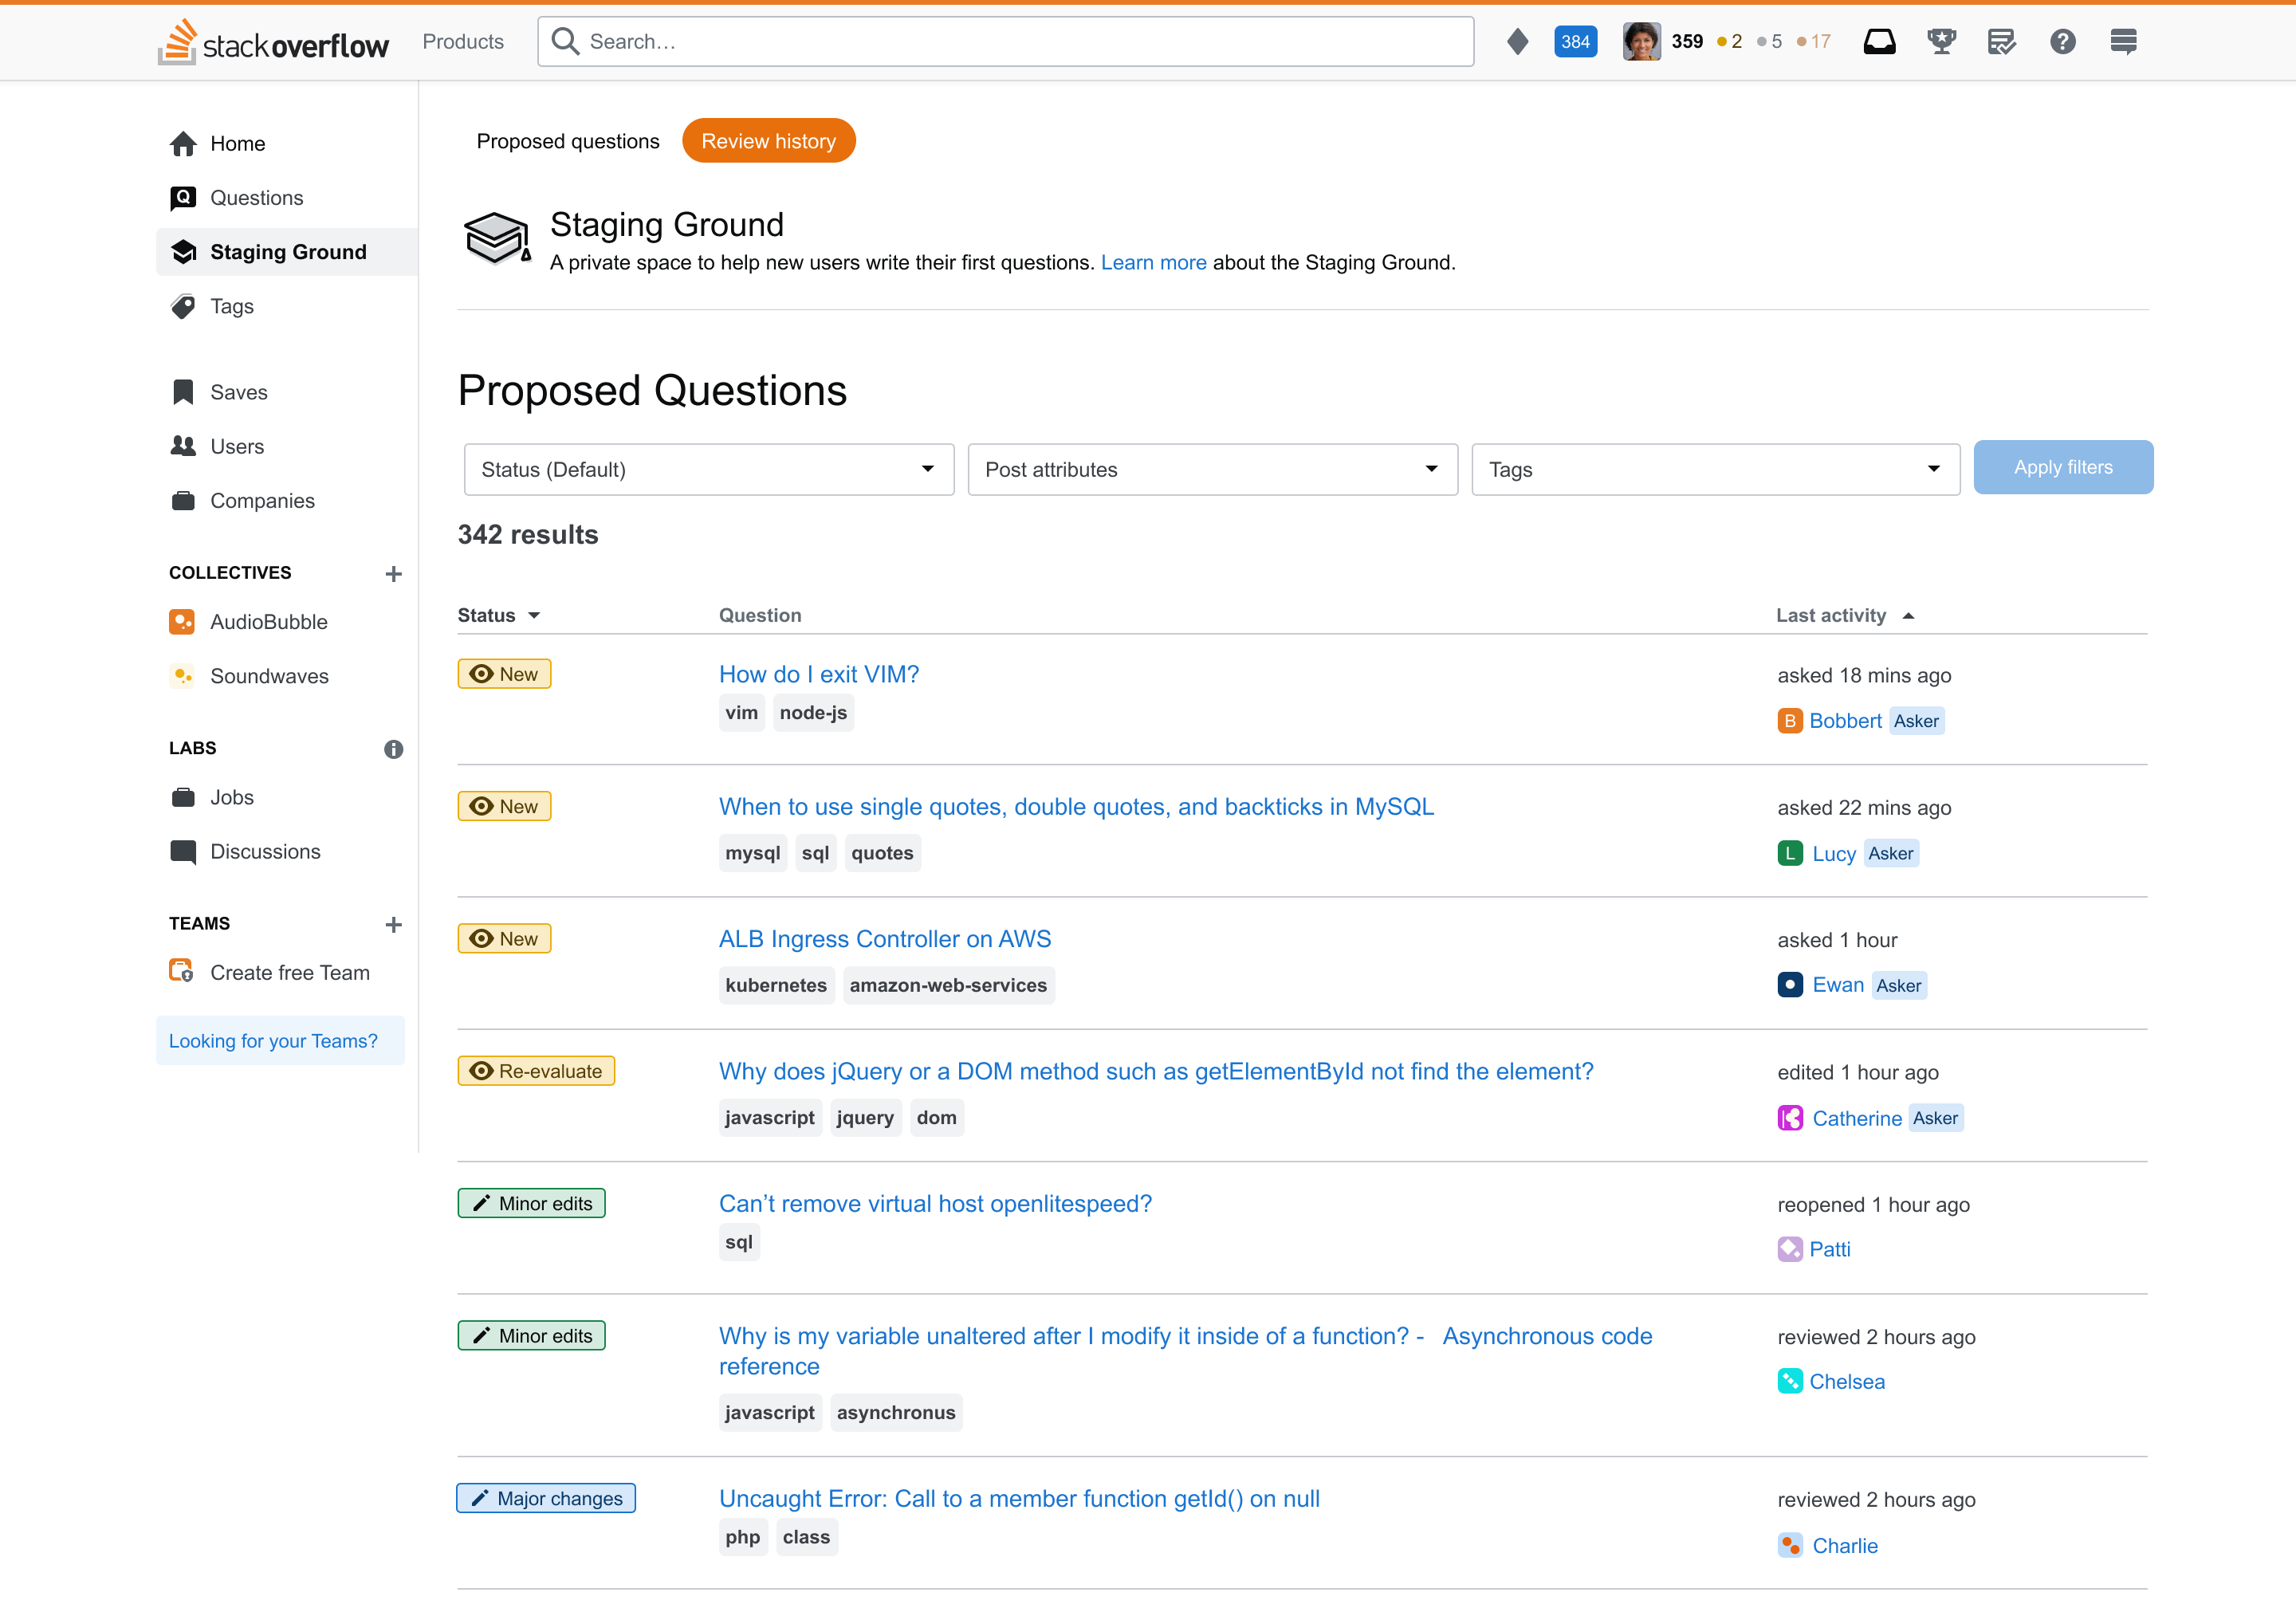 A screenshot of the Staging Ground home page on Stack Overflow displaying the Staging Ground icon on the left sidebar and Staging Ground inbox notifications.